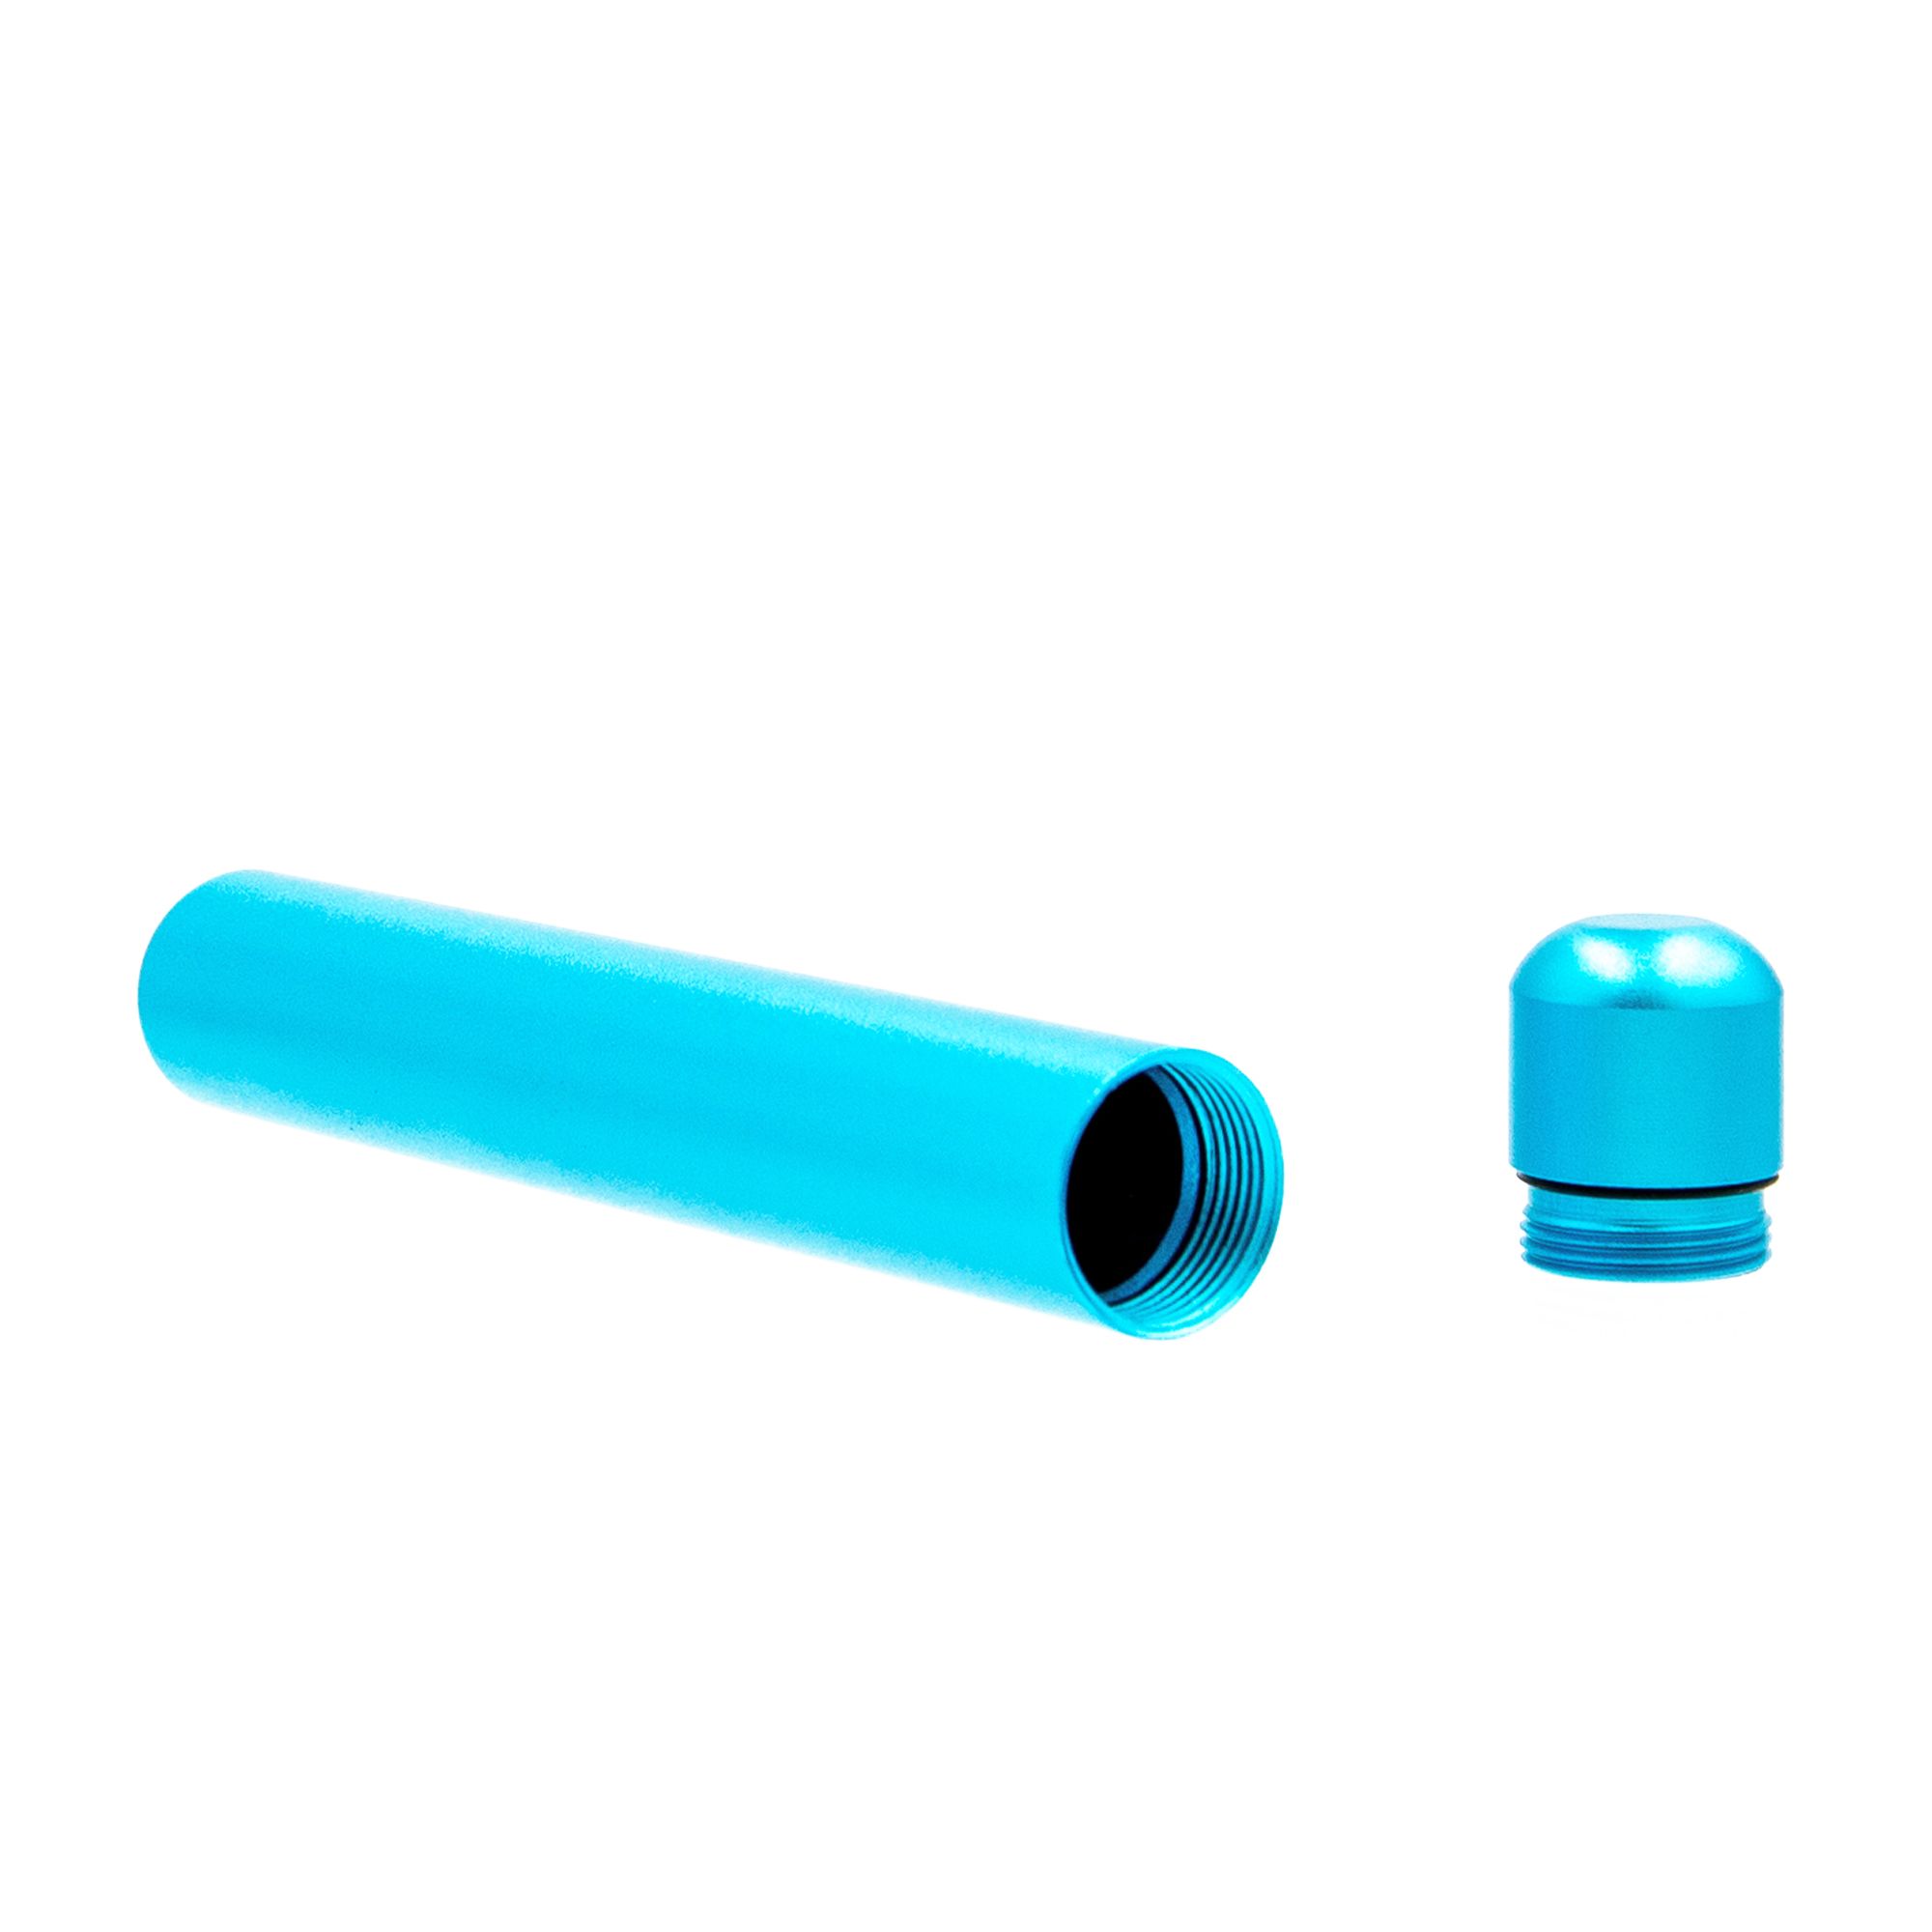 Smell Proof Metal Tube Blue 12 x 1.8 cm